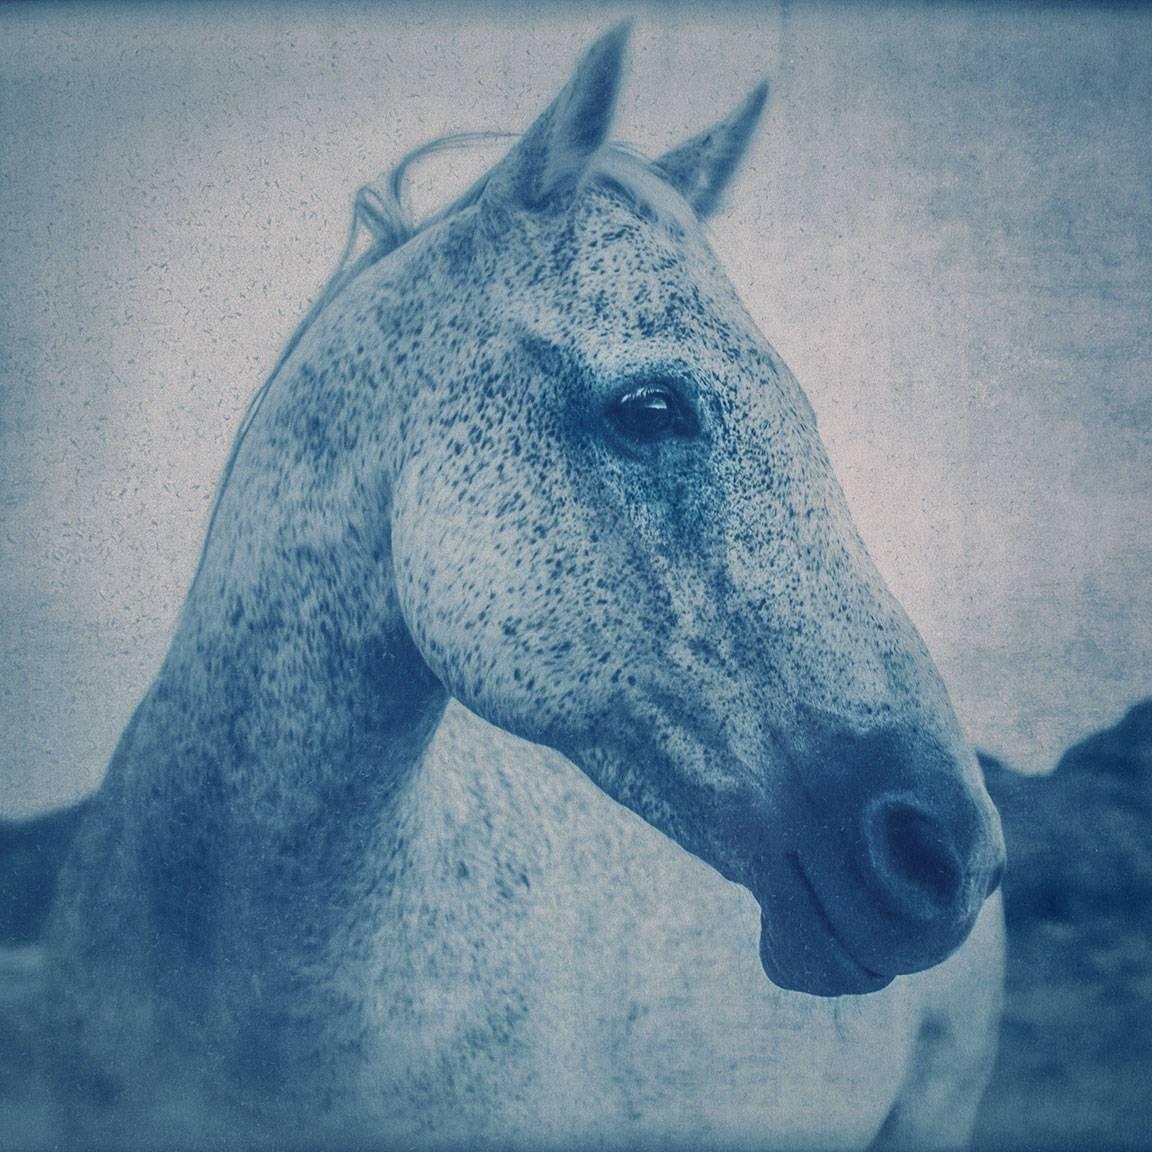 Horse 1, 1/12 - Photograph by Thomas Hager